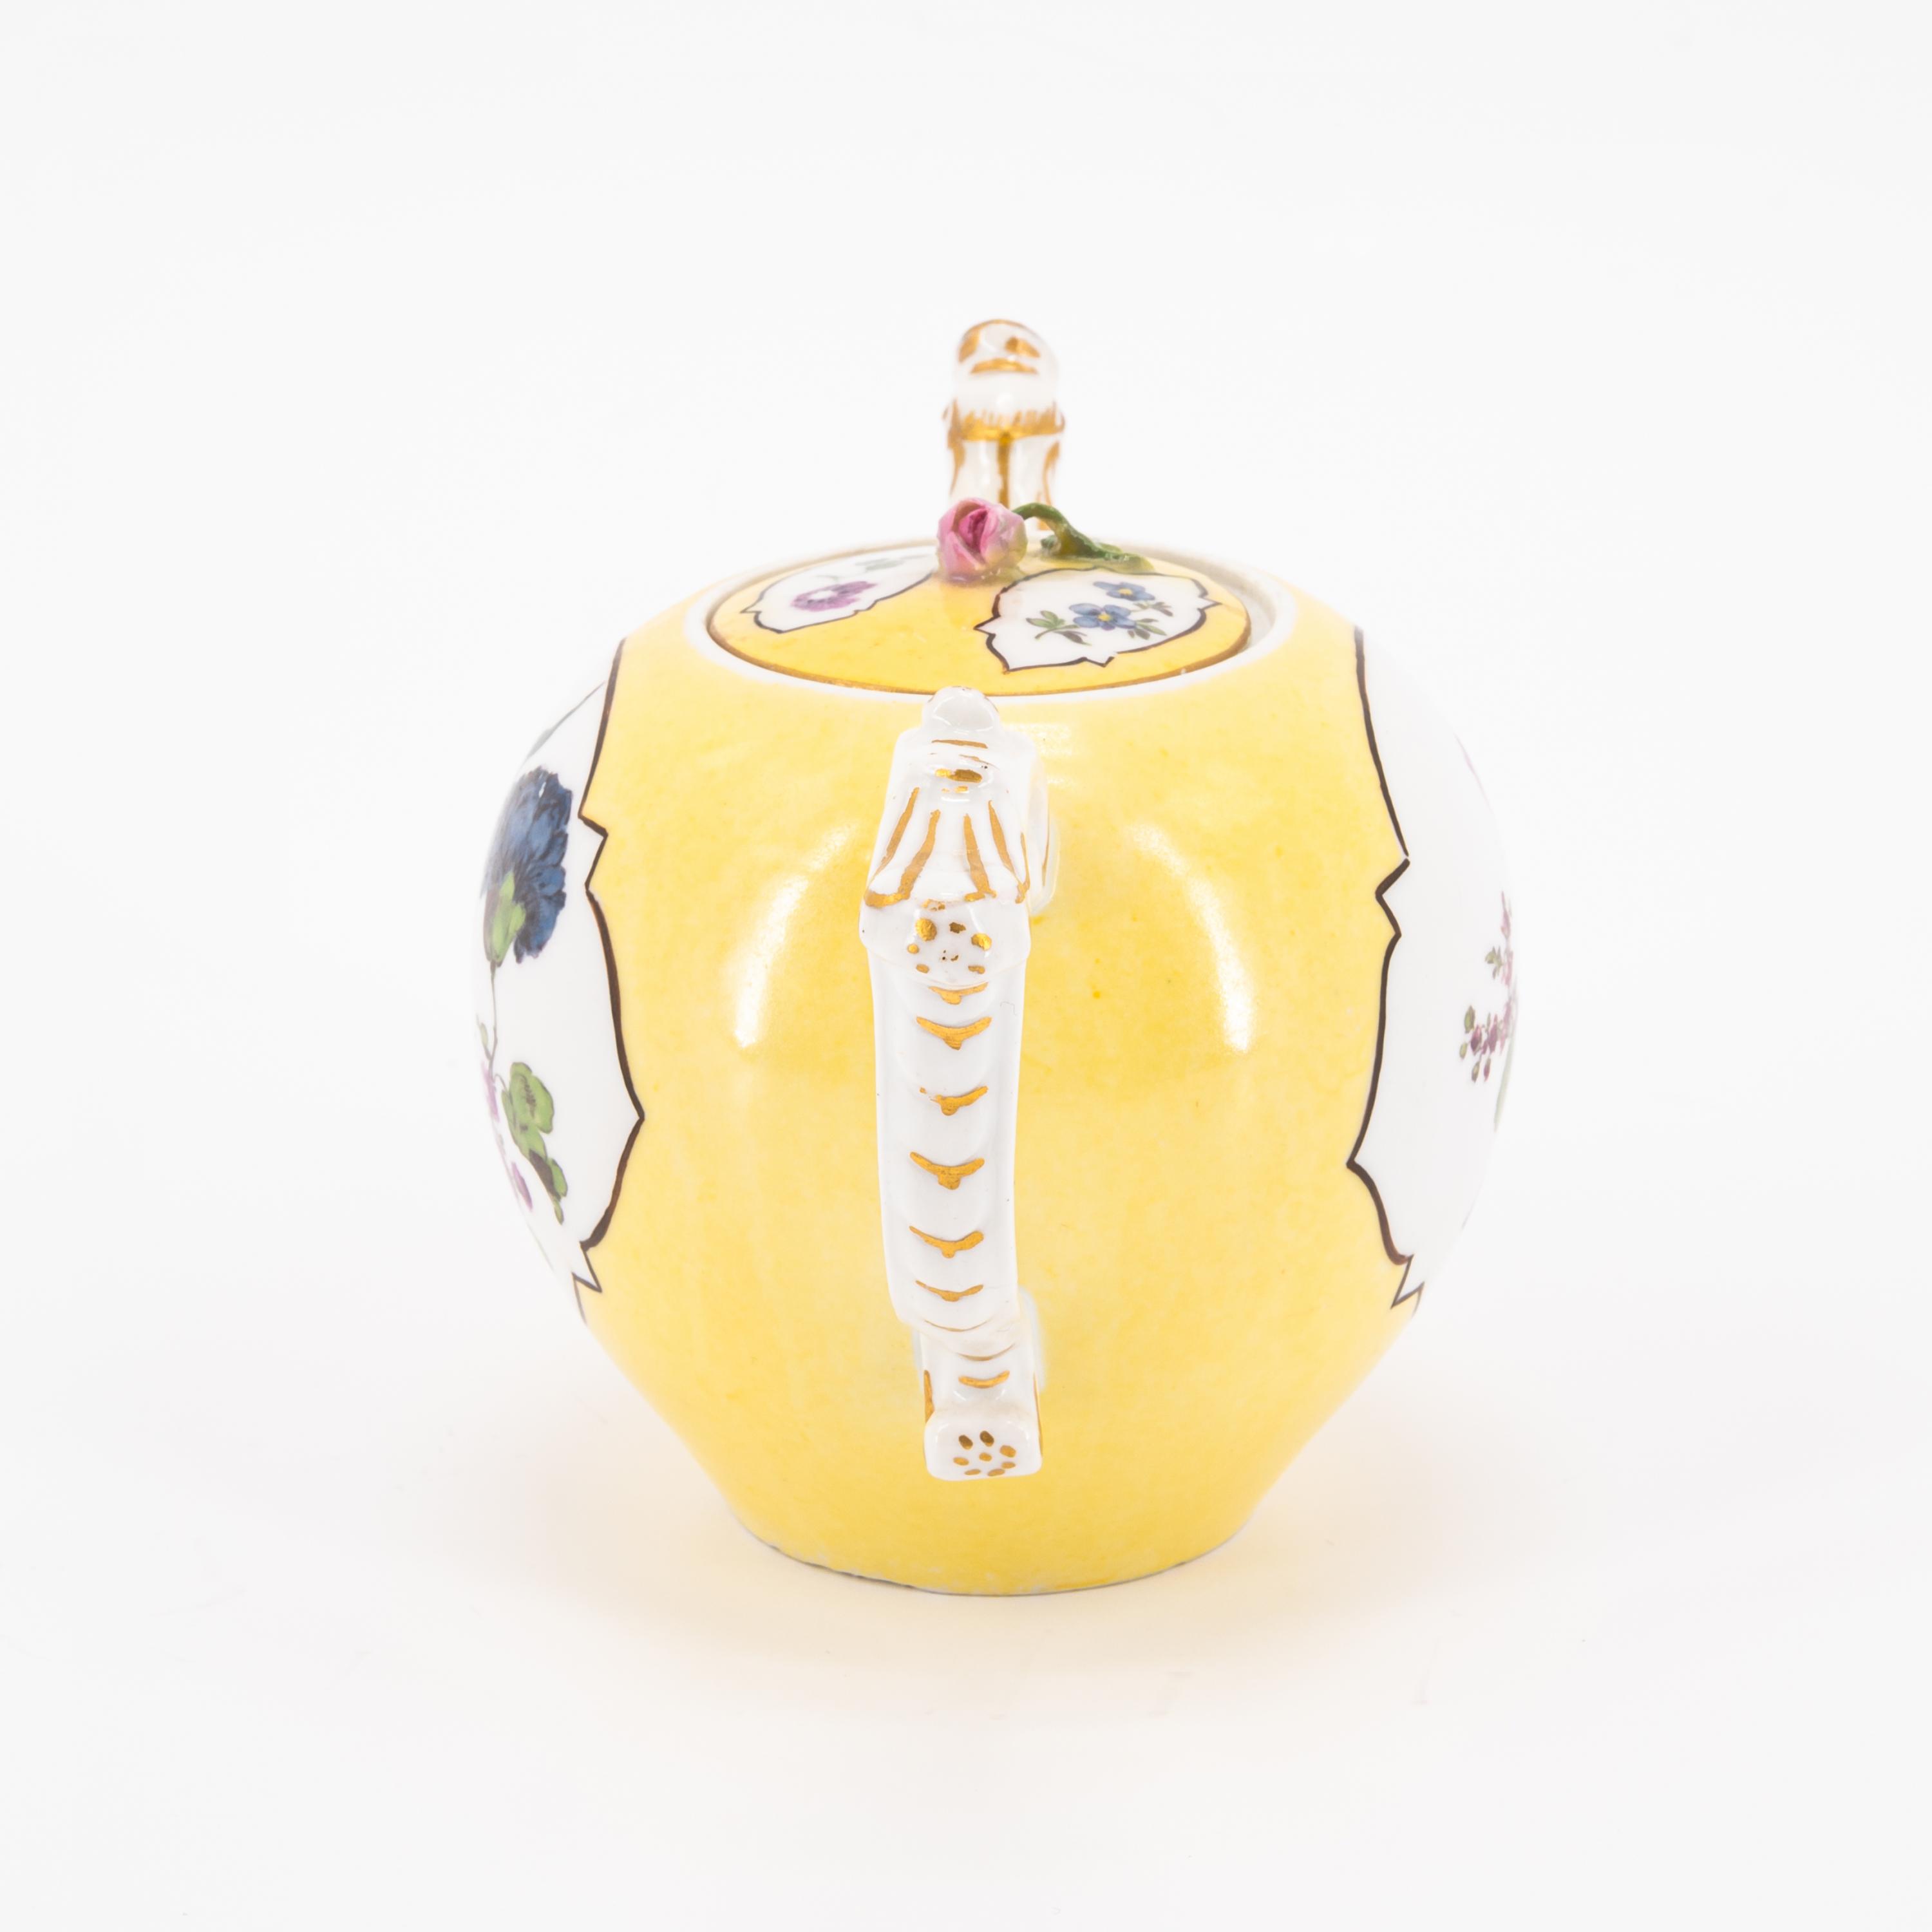 PORCELAIN TEA POT, TWO CUPS AND SAUCERS WITH YELLOW GROUND AND OMBRÉ FLORAL PAINTING - Image 7 of 11